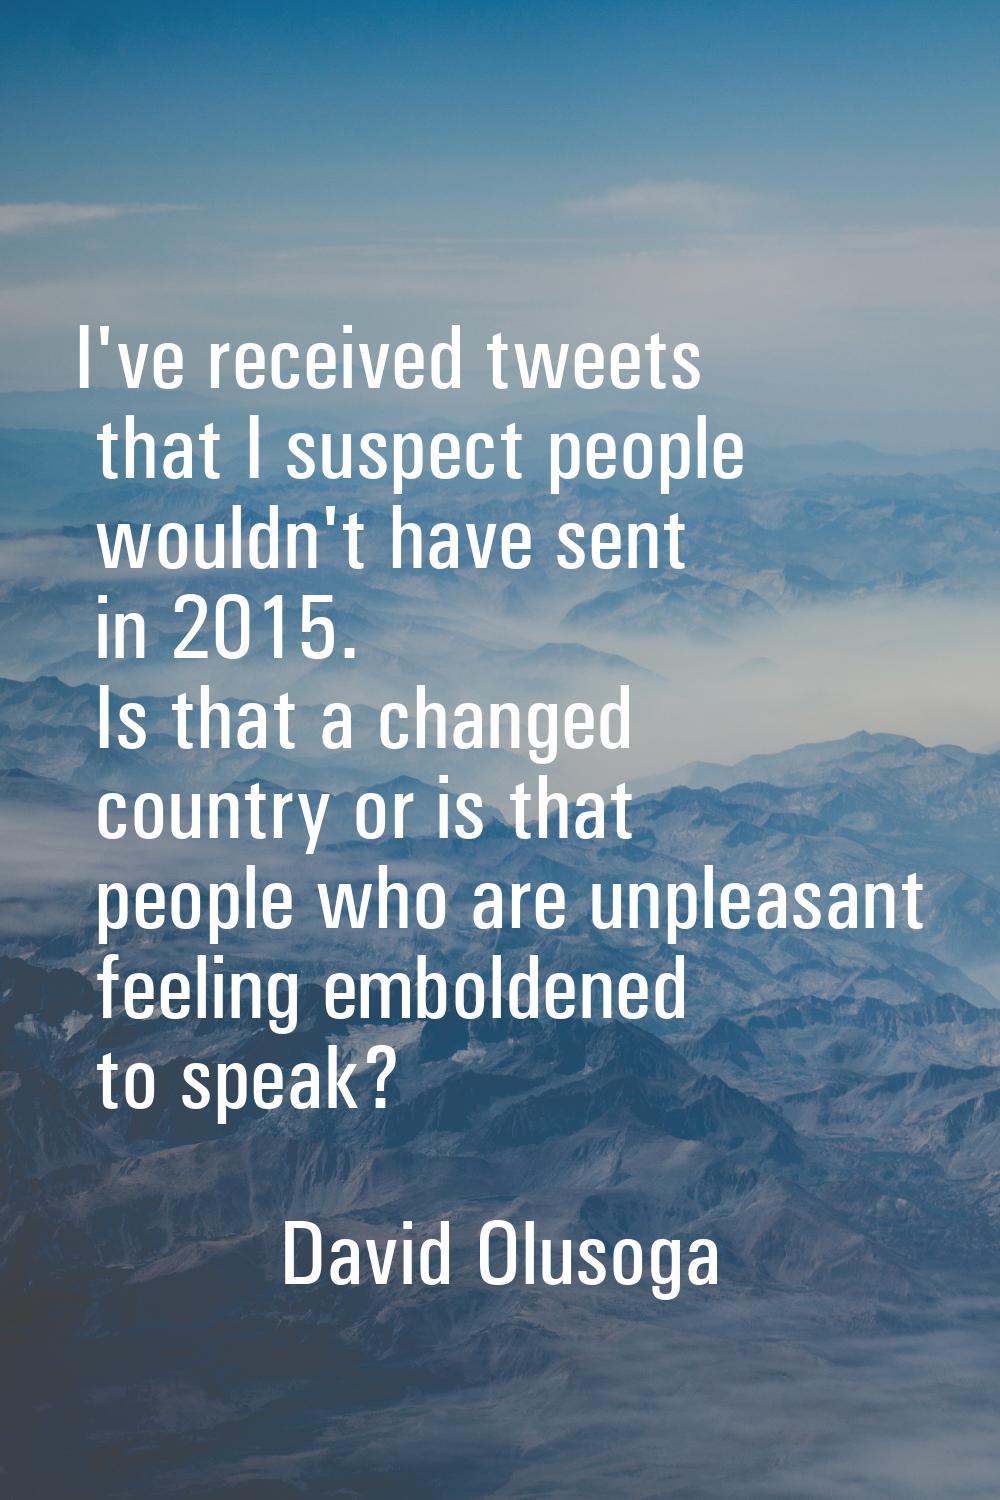 I've received tweets that I suspect people wouldn't have sent in 2015. Is that a changed country or